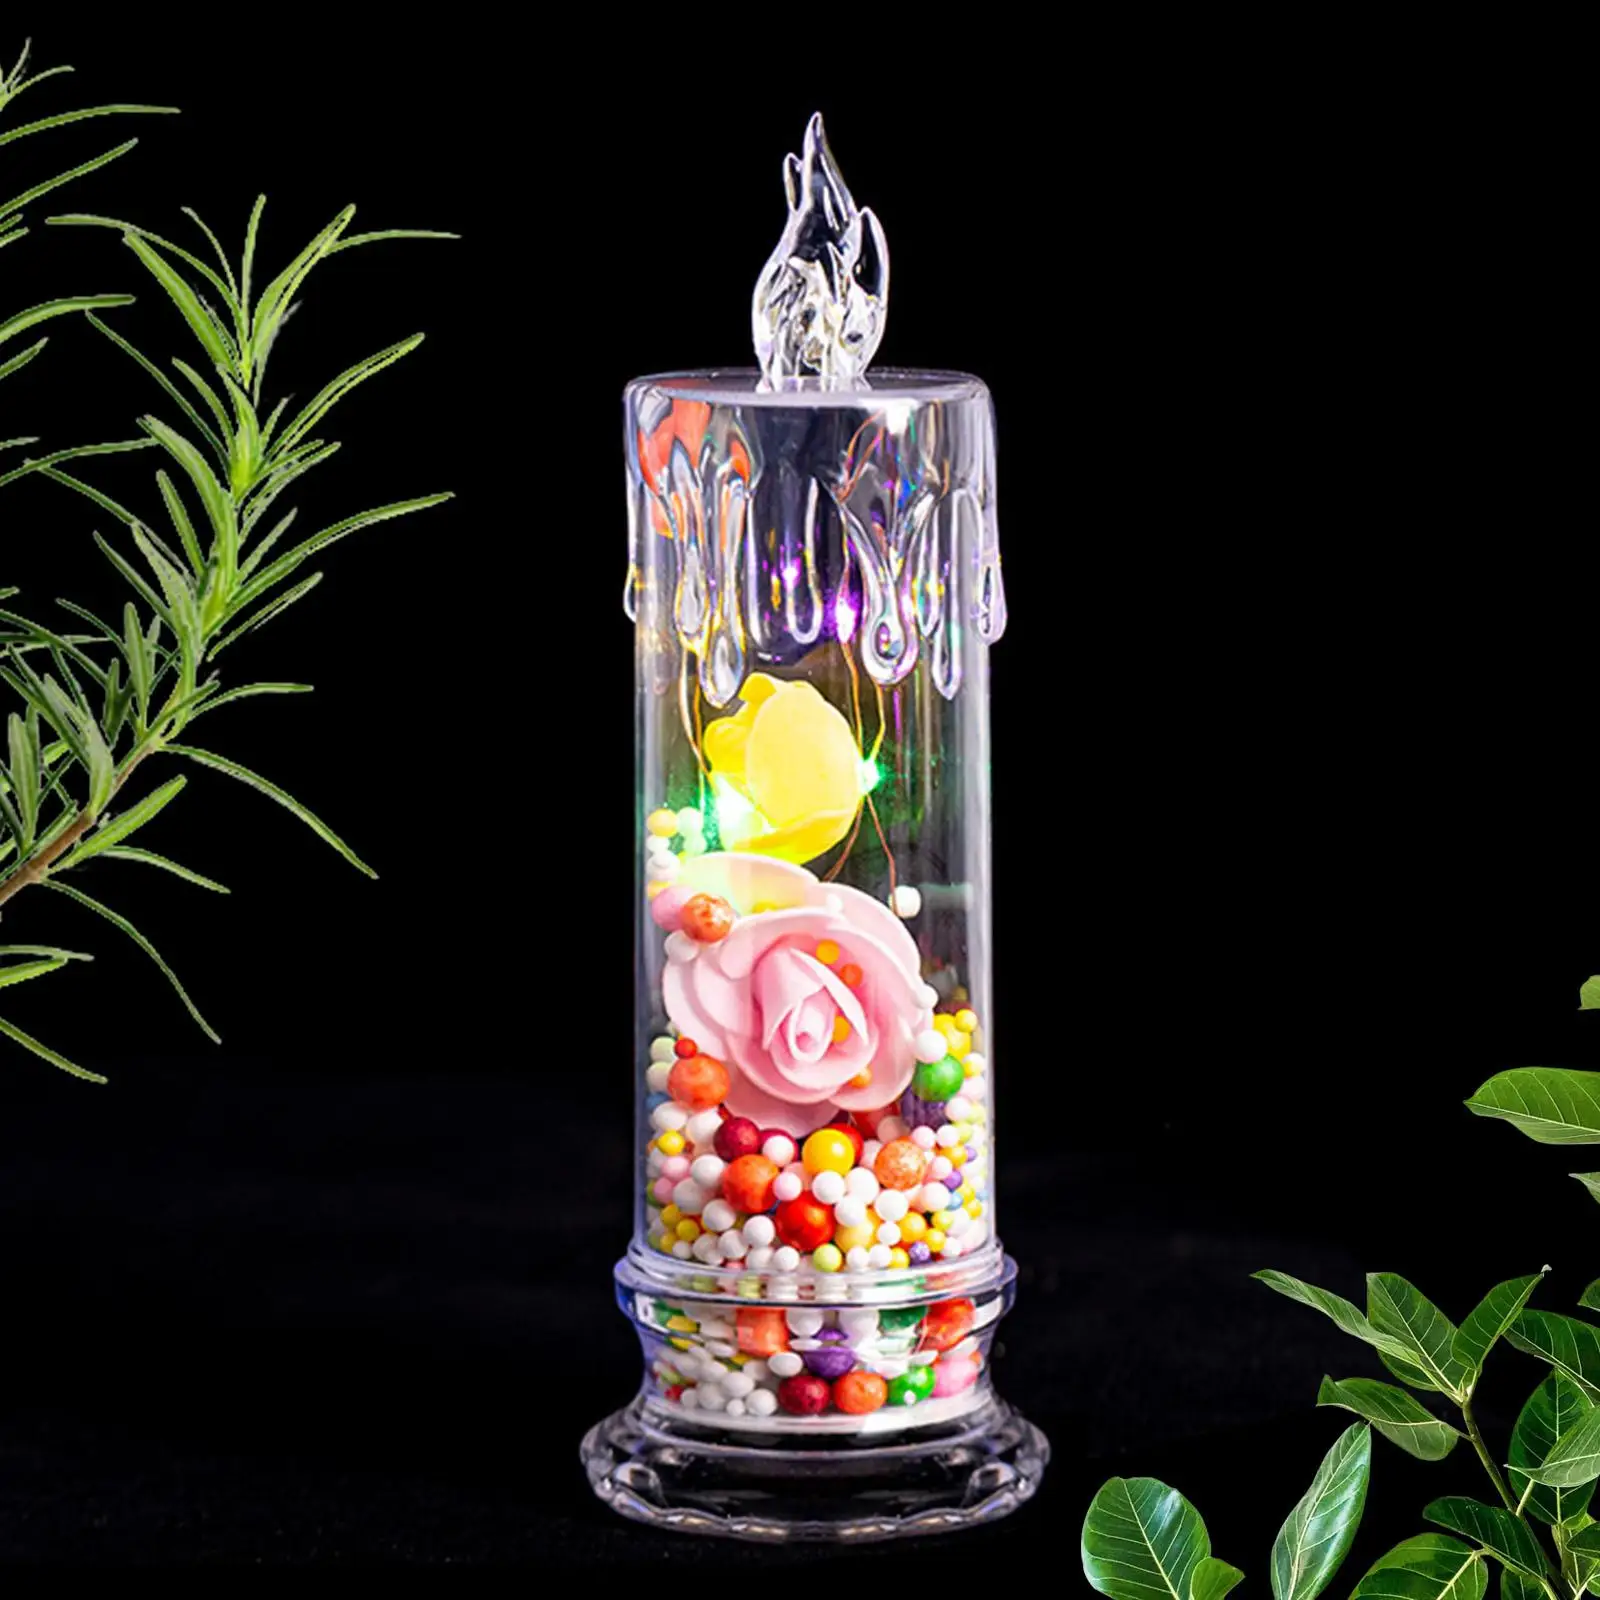 Preserved Rose Gifts with Colorful Lights Handmade Enchanted Rose Beautiful LED Preserved Rose for Teens Girlfriend Him Her Kids